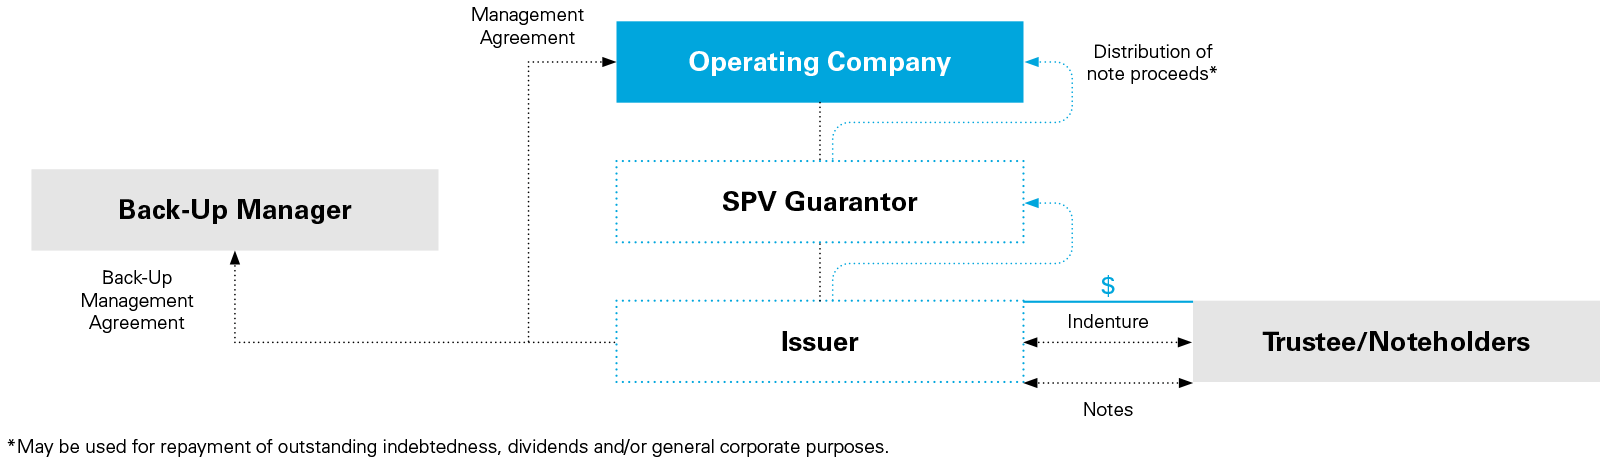 non-traditional securitization structure